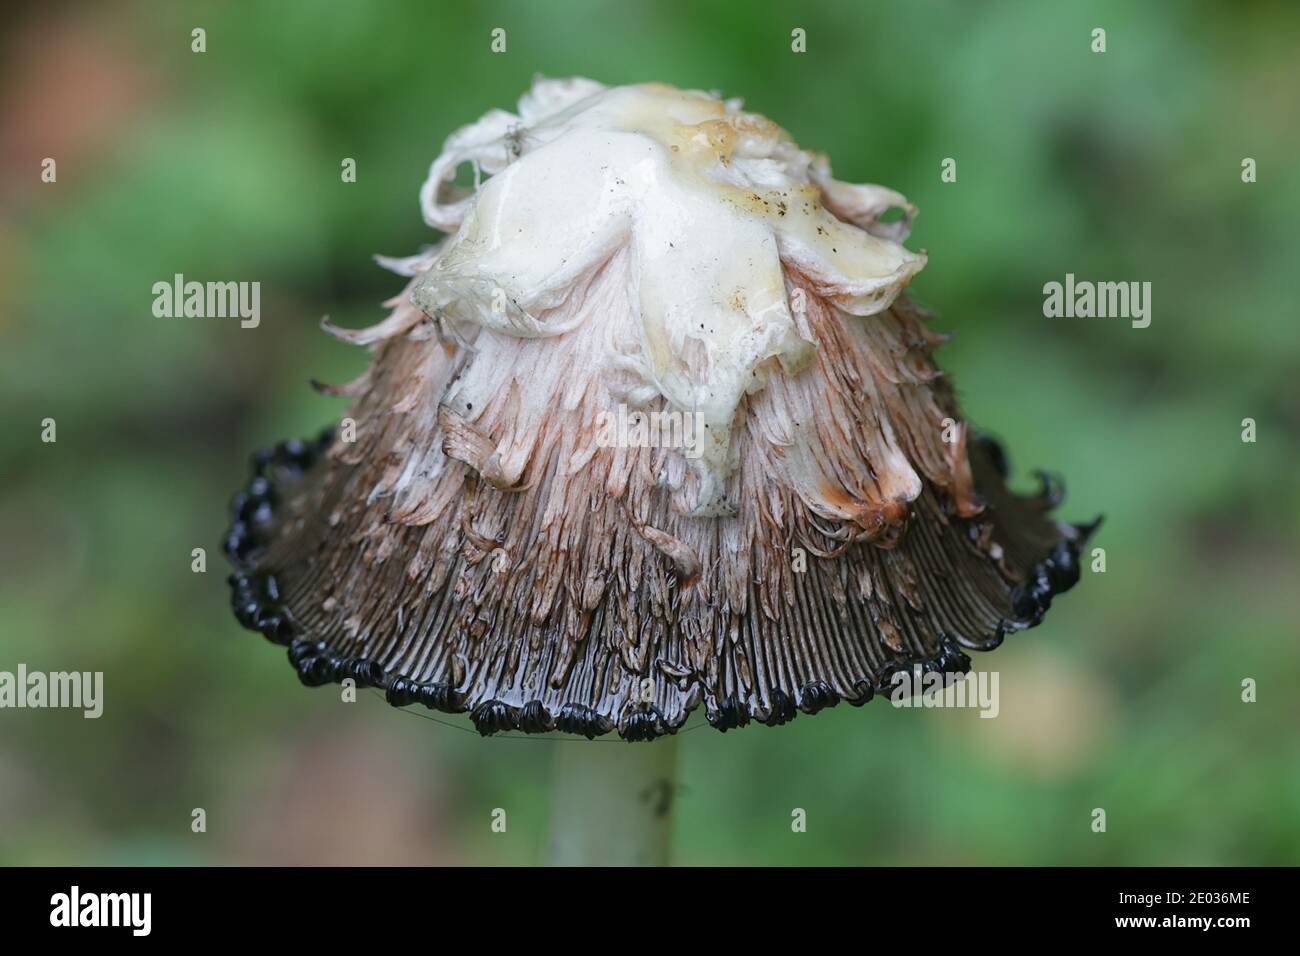 Coprinus comatus, the shaggy ink cap, lawyer's wig, or shaggy mane, wild mushroom from Finland Stock Photo